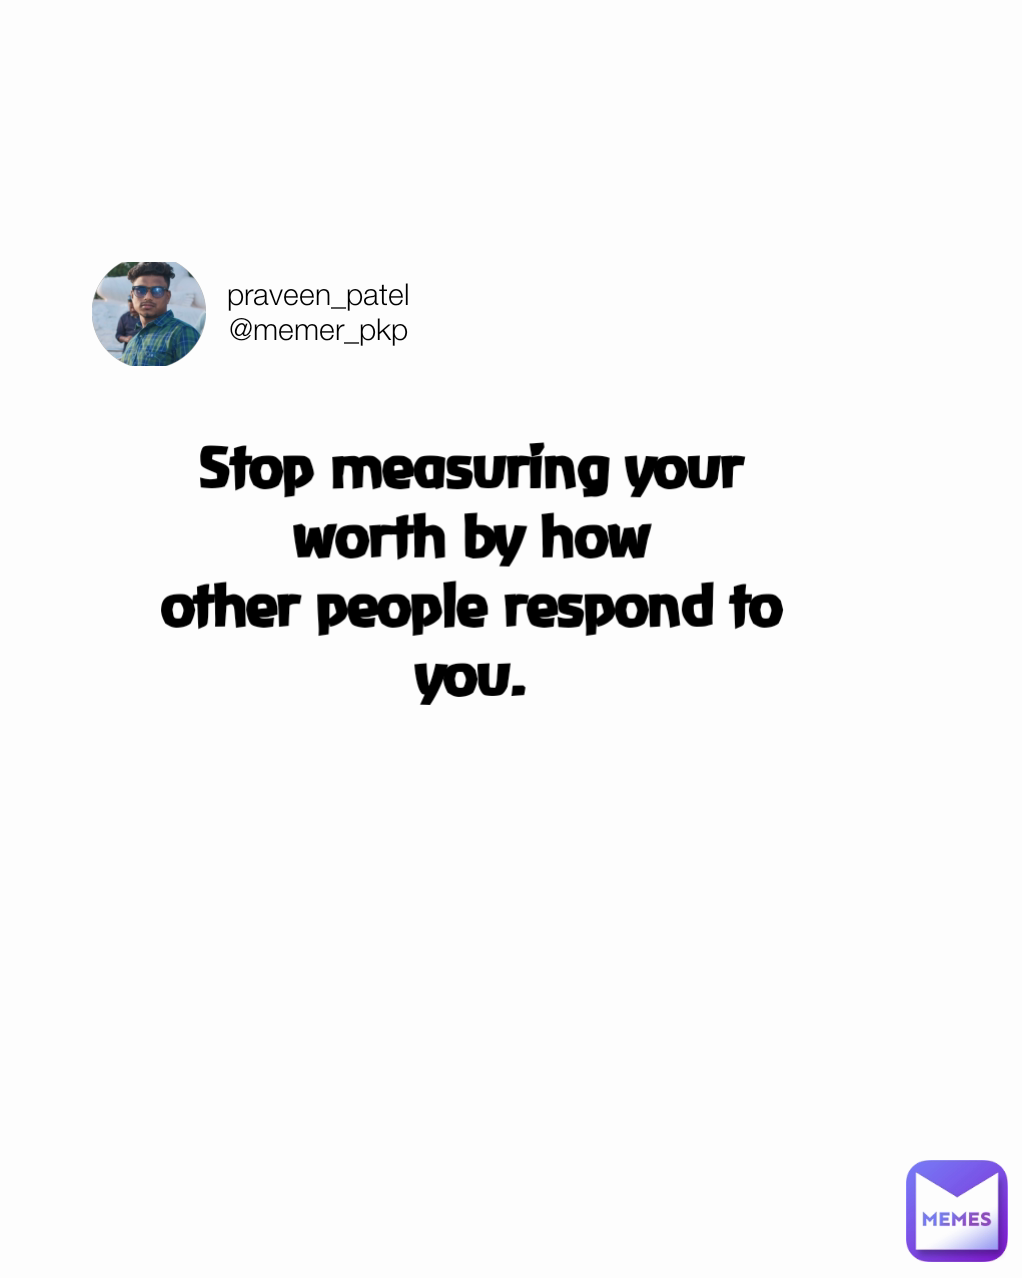 praveen_patel
@memer_pkp Stop measuring your worth by how
other people respond to you.